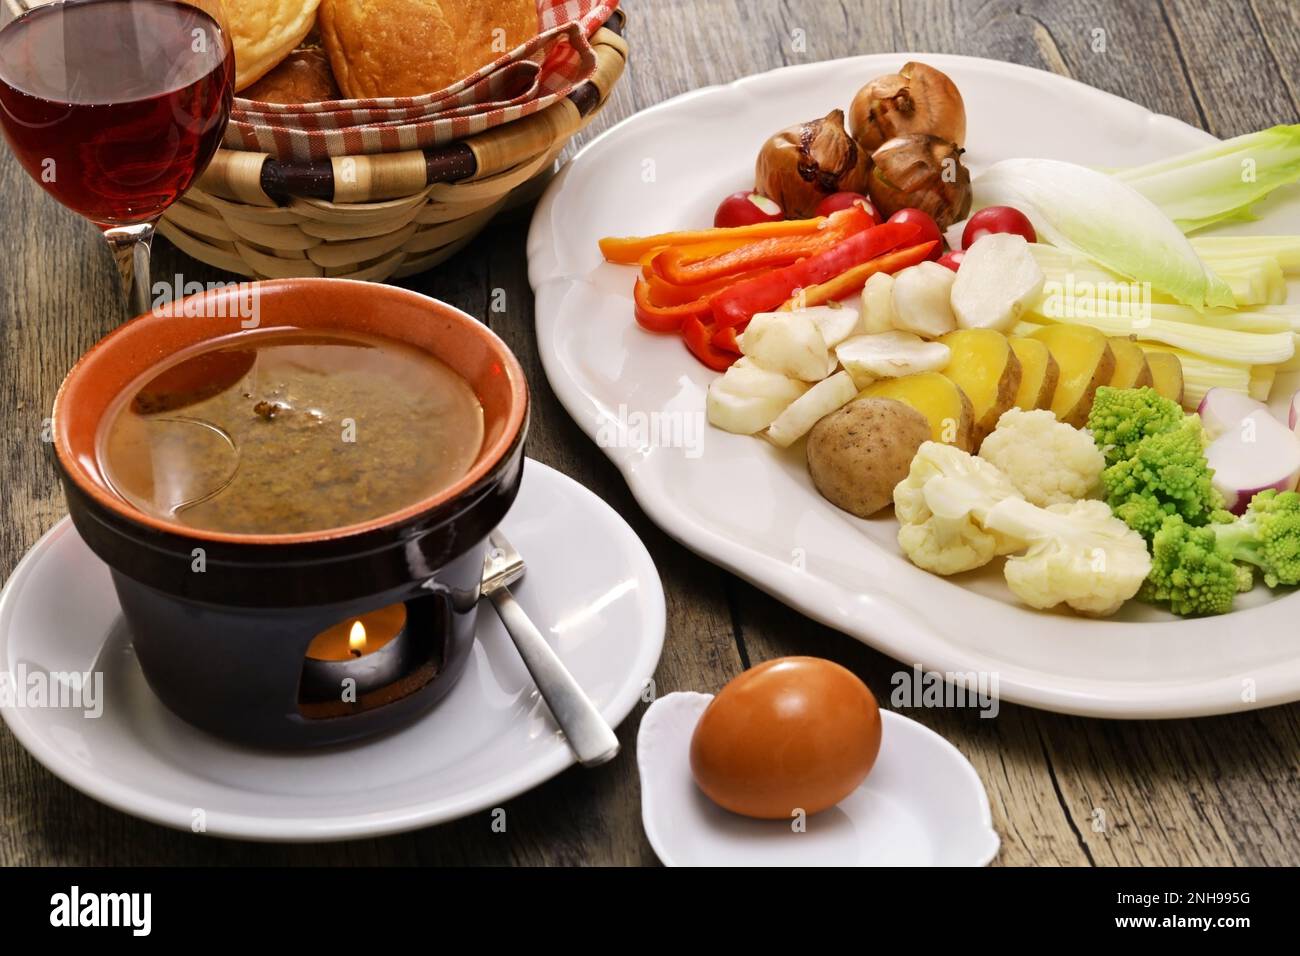 Bagna cauda(Italian Piedmont cuisine)  is a hot dip made from garlic and anchovies.  The dish is served with raw or cooked vegetables. Stock Photo